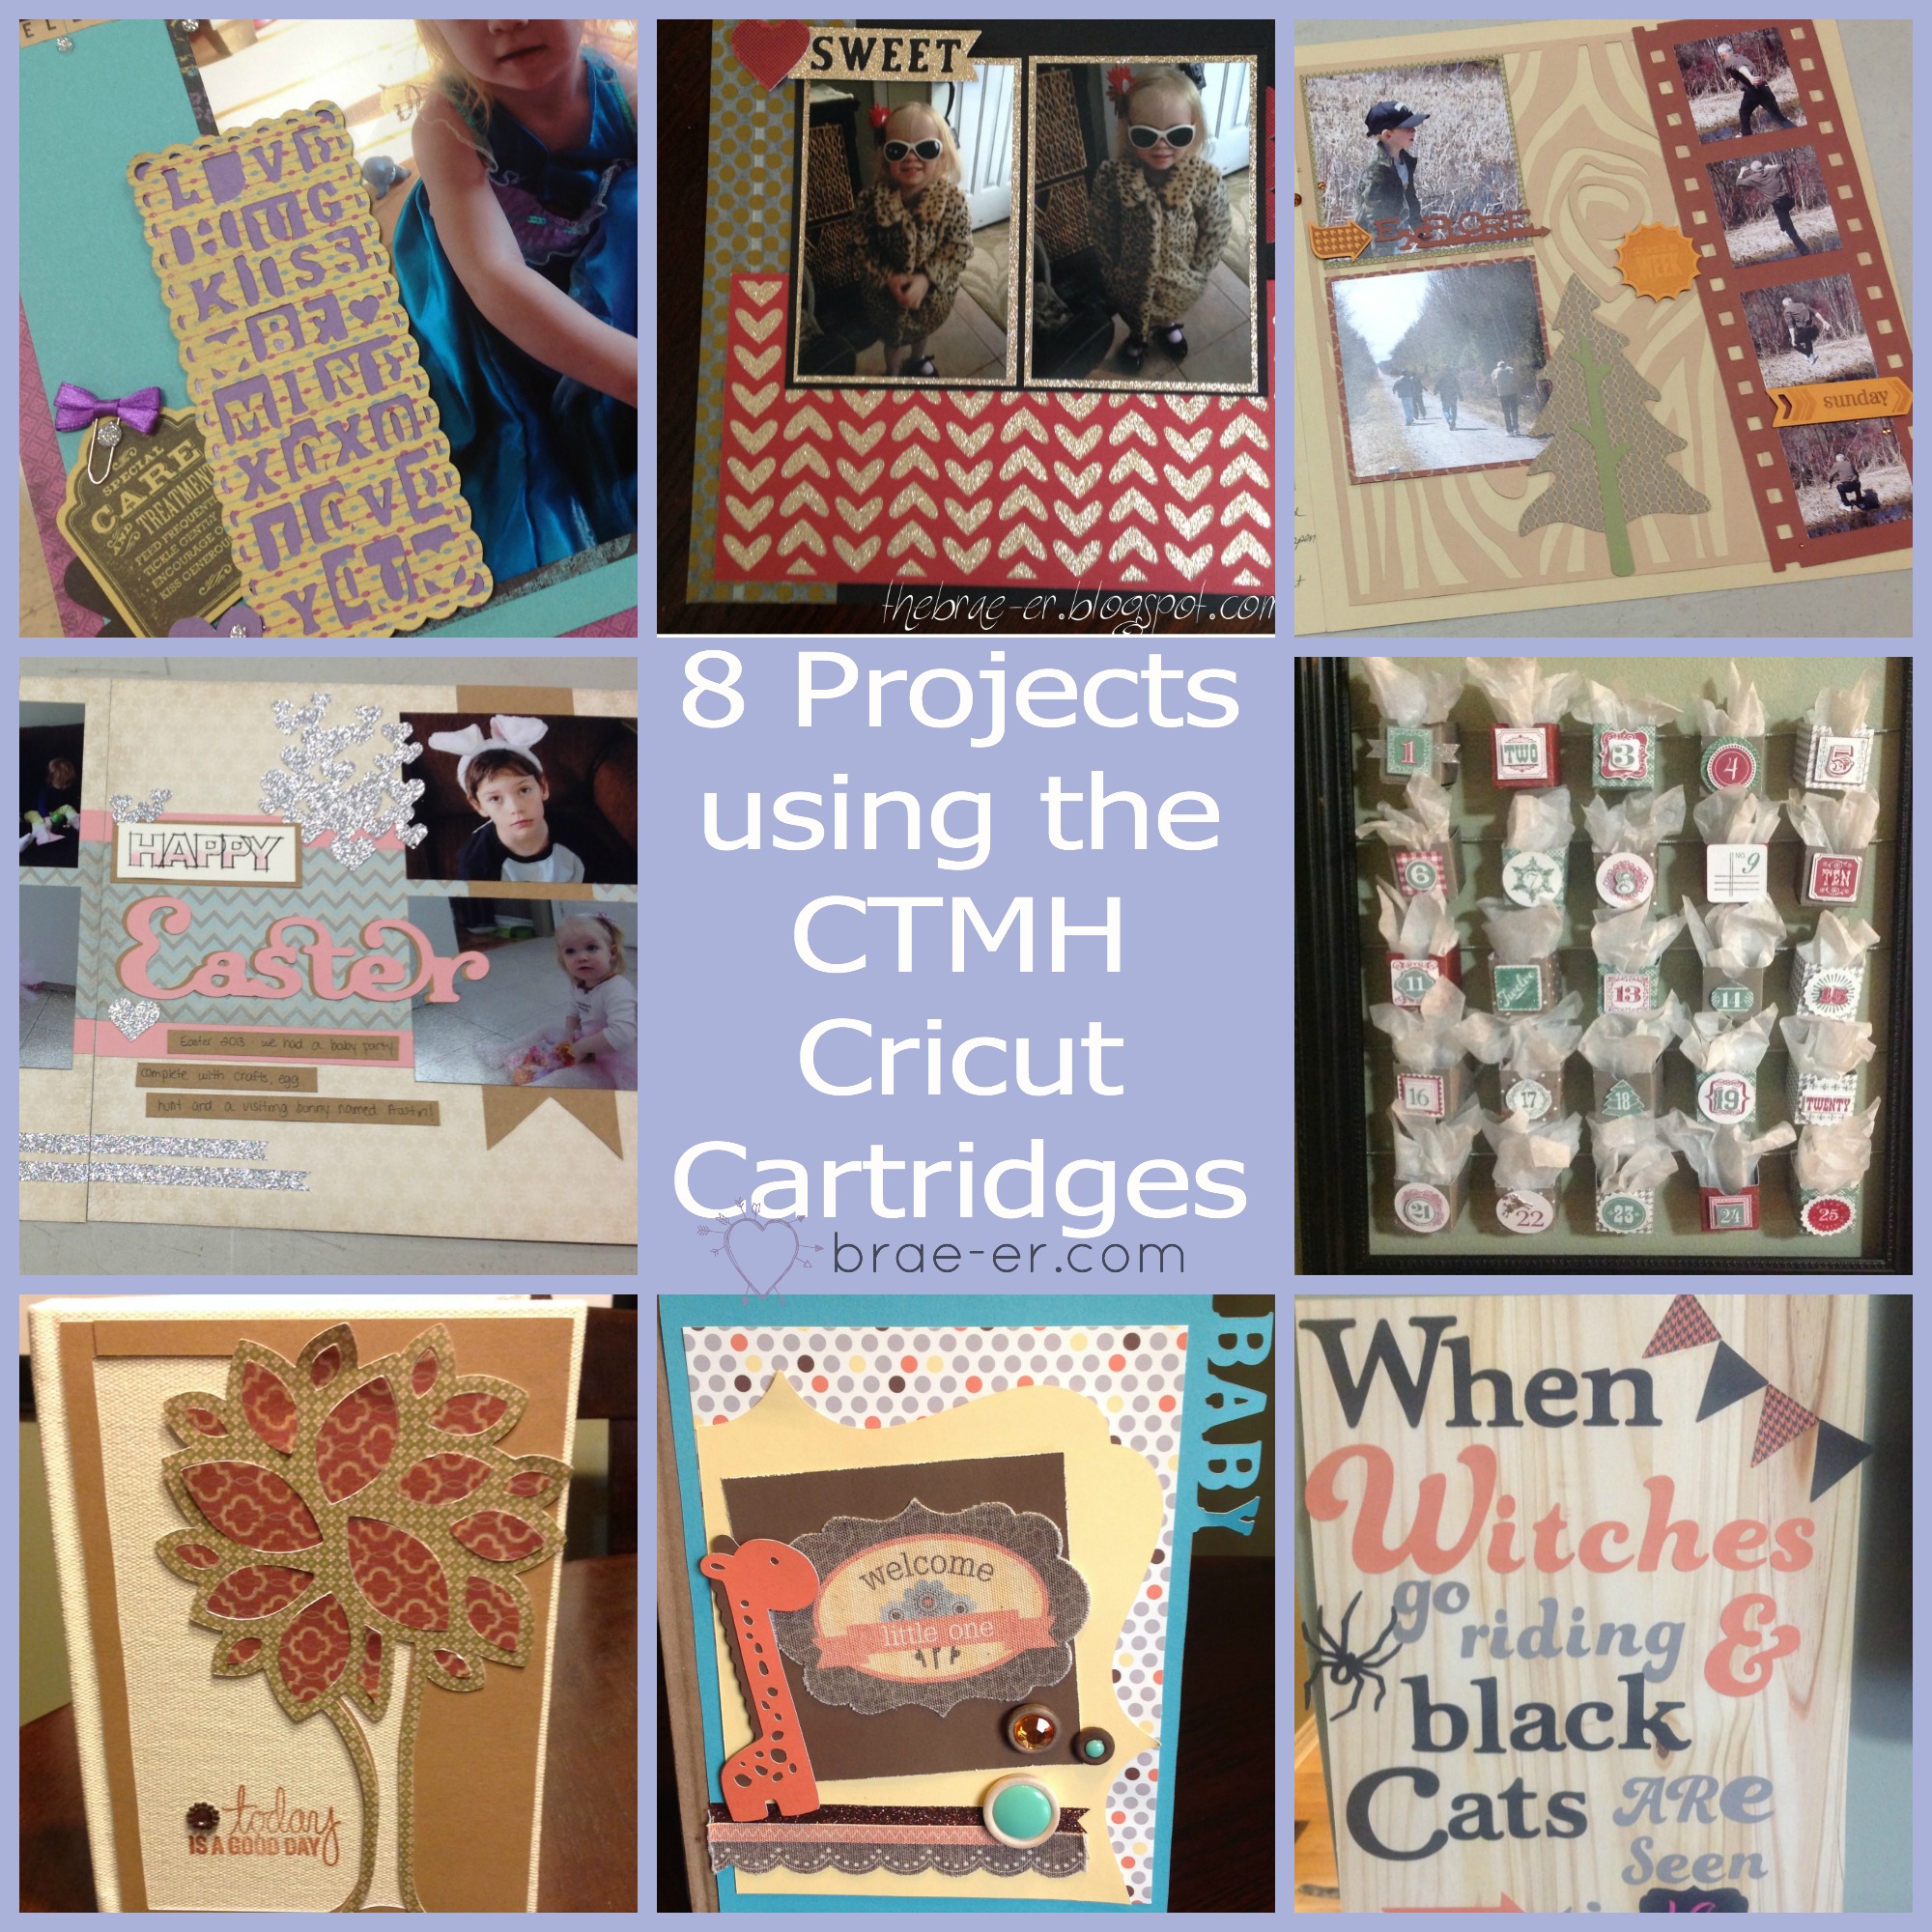 8 projects using the CTMH cricut